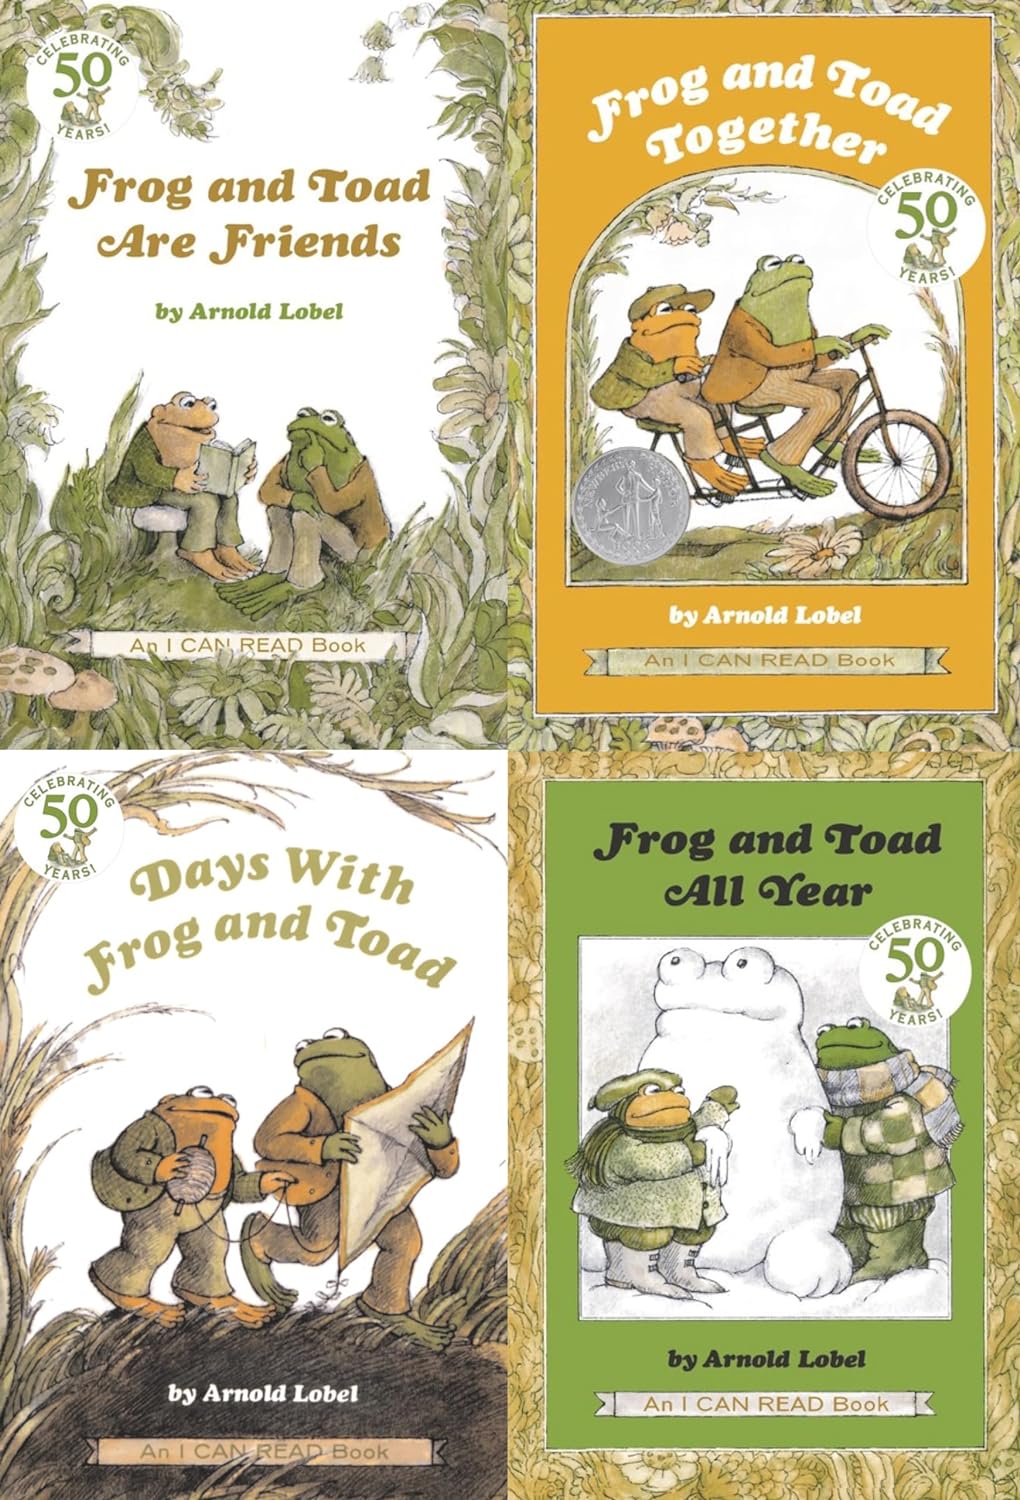 Frog and Toad book set